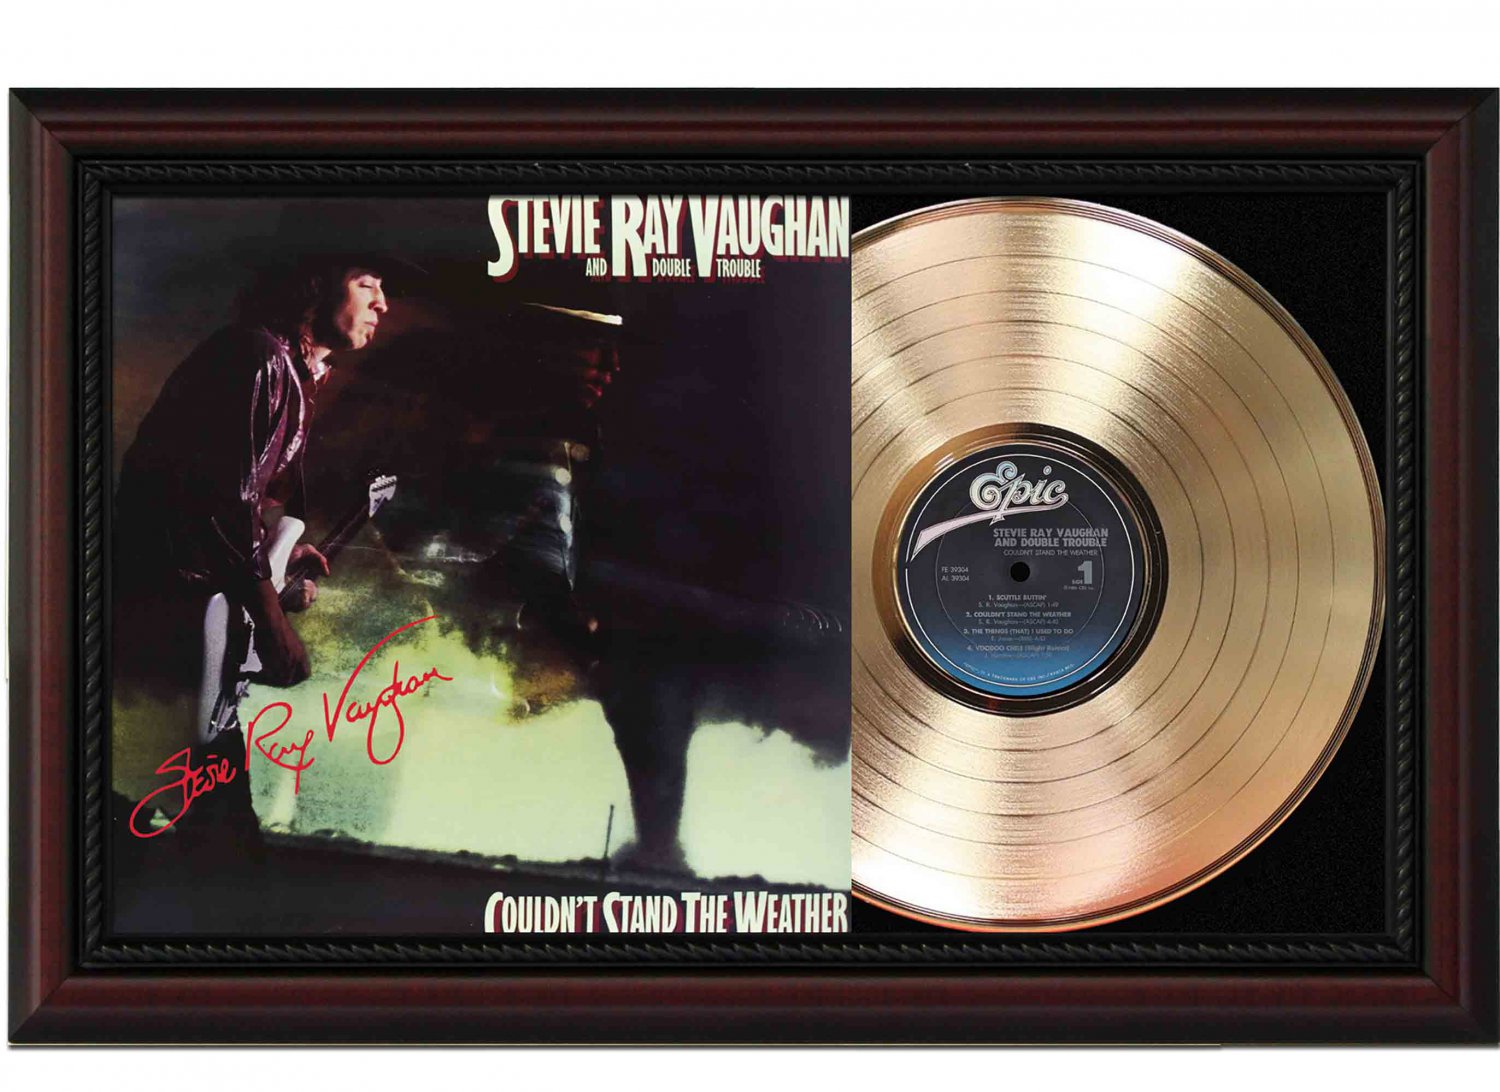 STEVIE RAY VAUGHAN "Couldn't Stand the Weather" Framed Record Display.